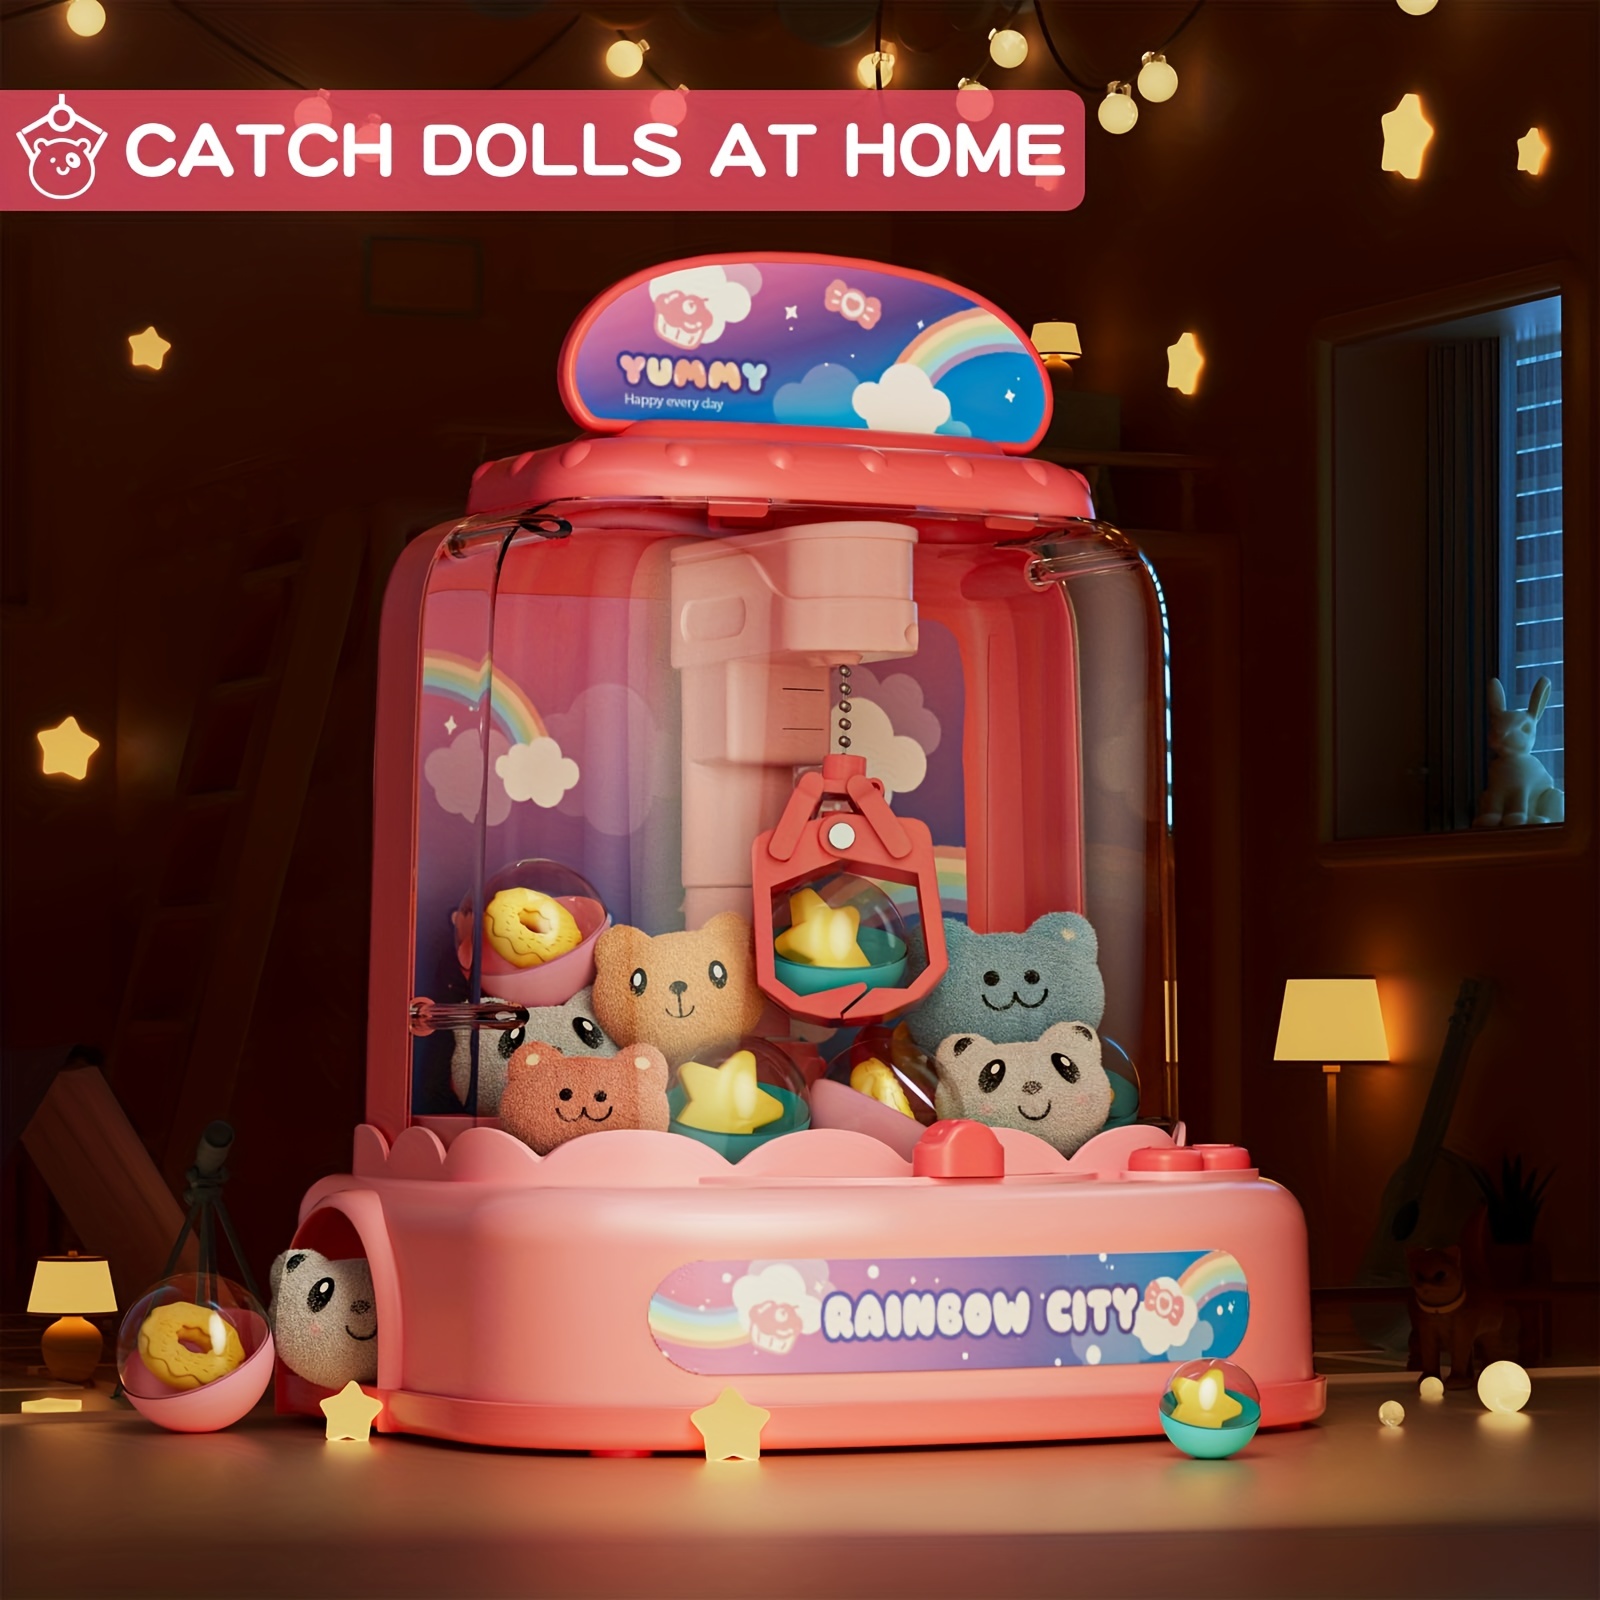 

Bring The Arcade Home: Kids' Electronic Claw Machine With Lights, Sounds, & Prizes!